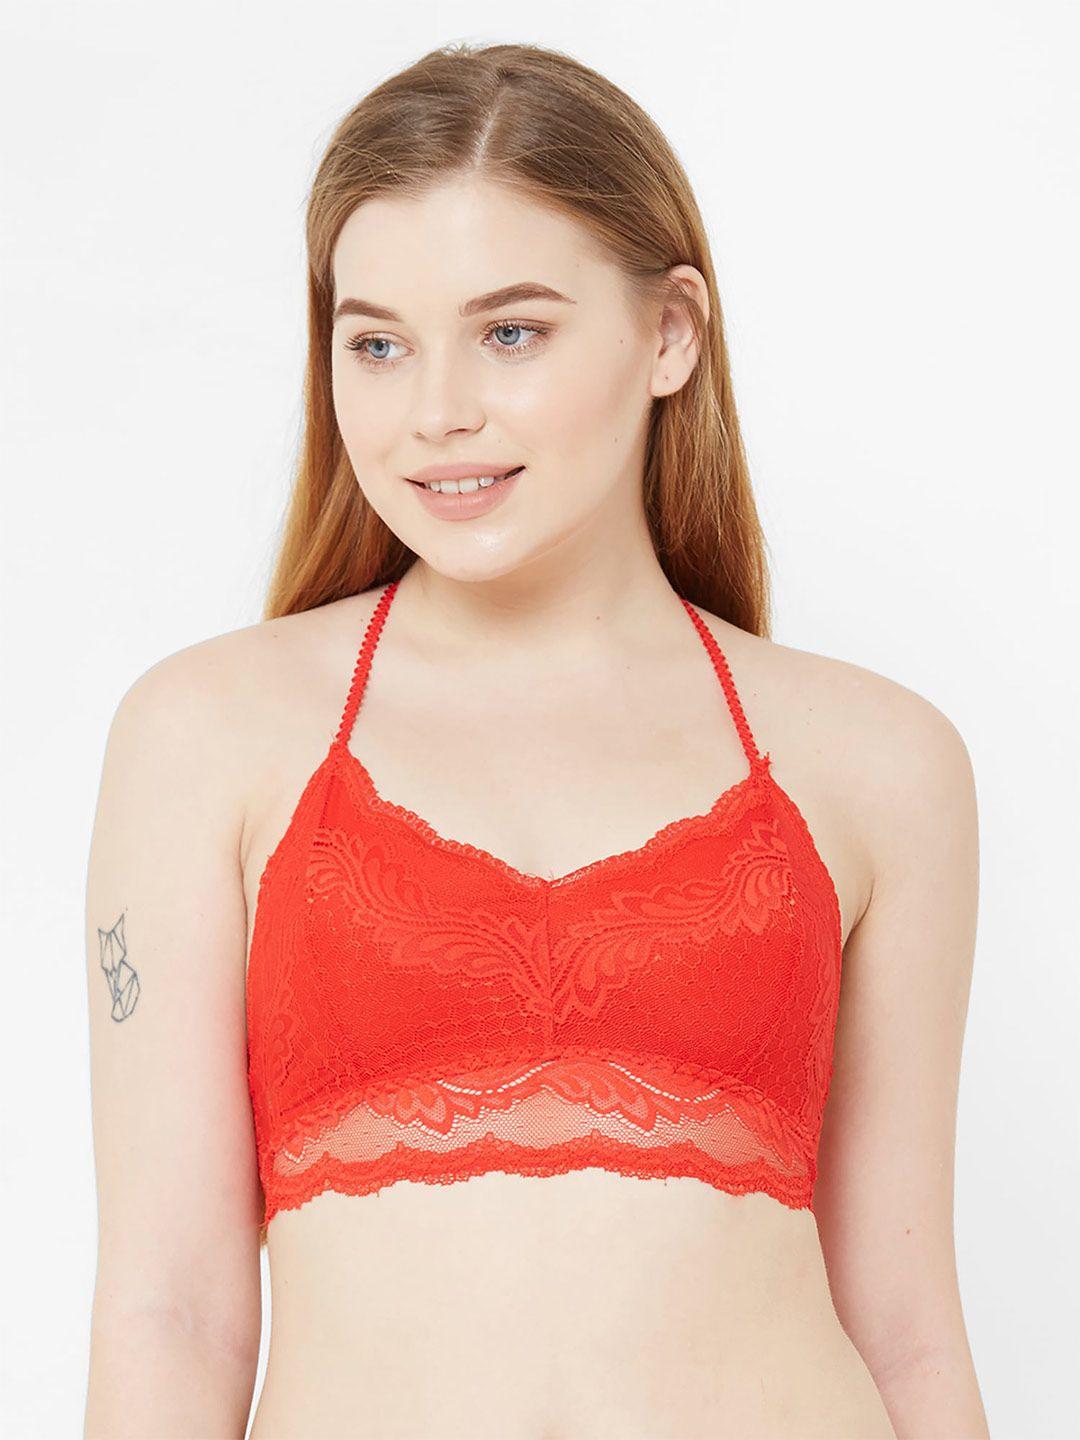 noira floral laced full coverage removable padding bralette bra with all day comfort